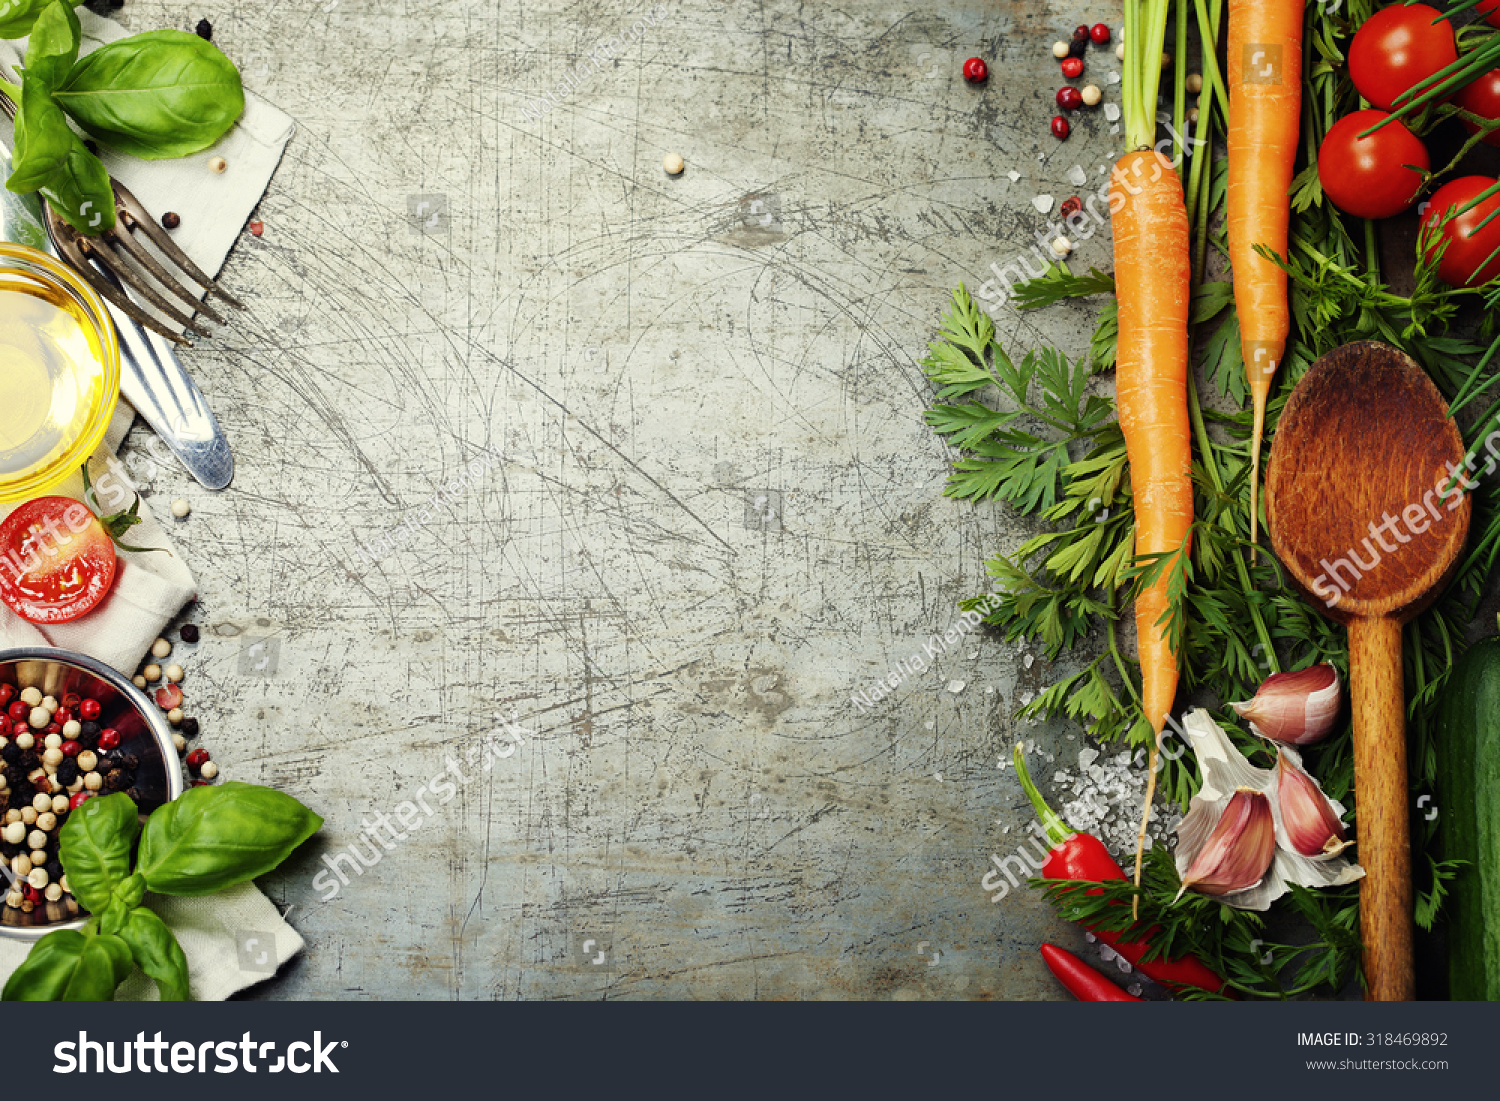 Wooden spoon and ingredients on old background. Vegetarian food, health or cooking concept. #318469892